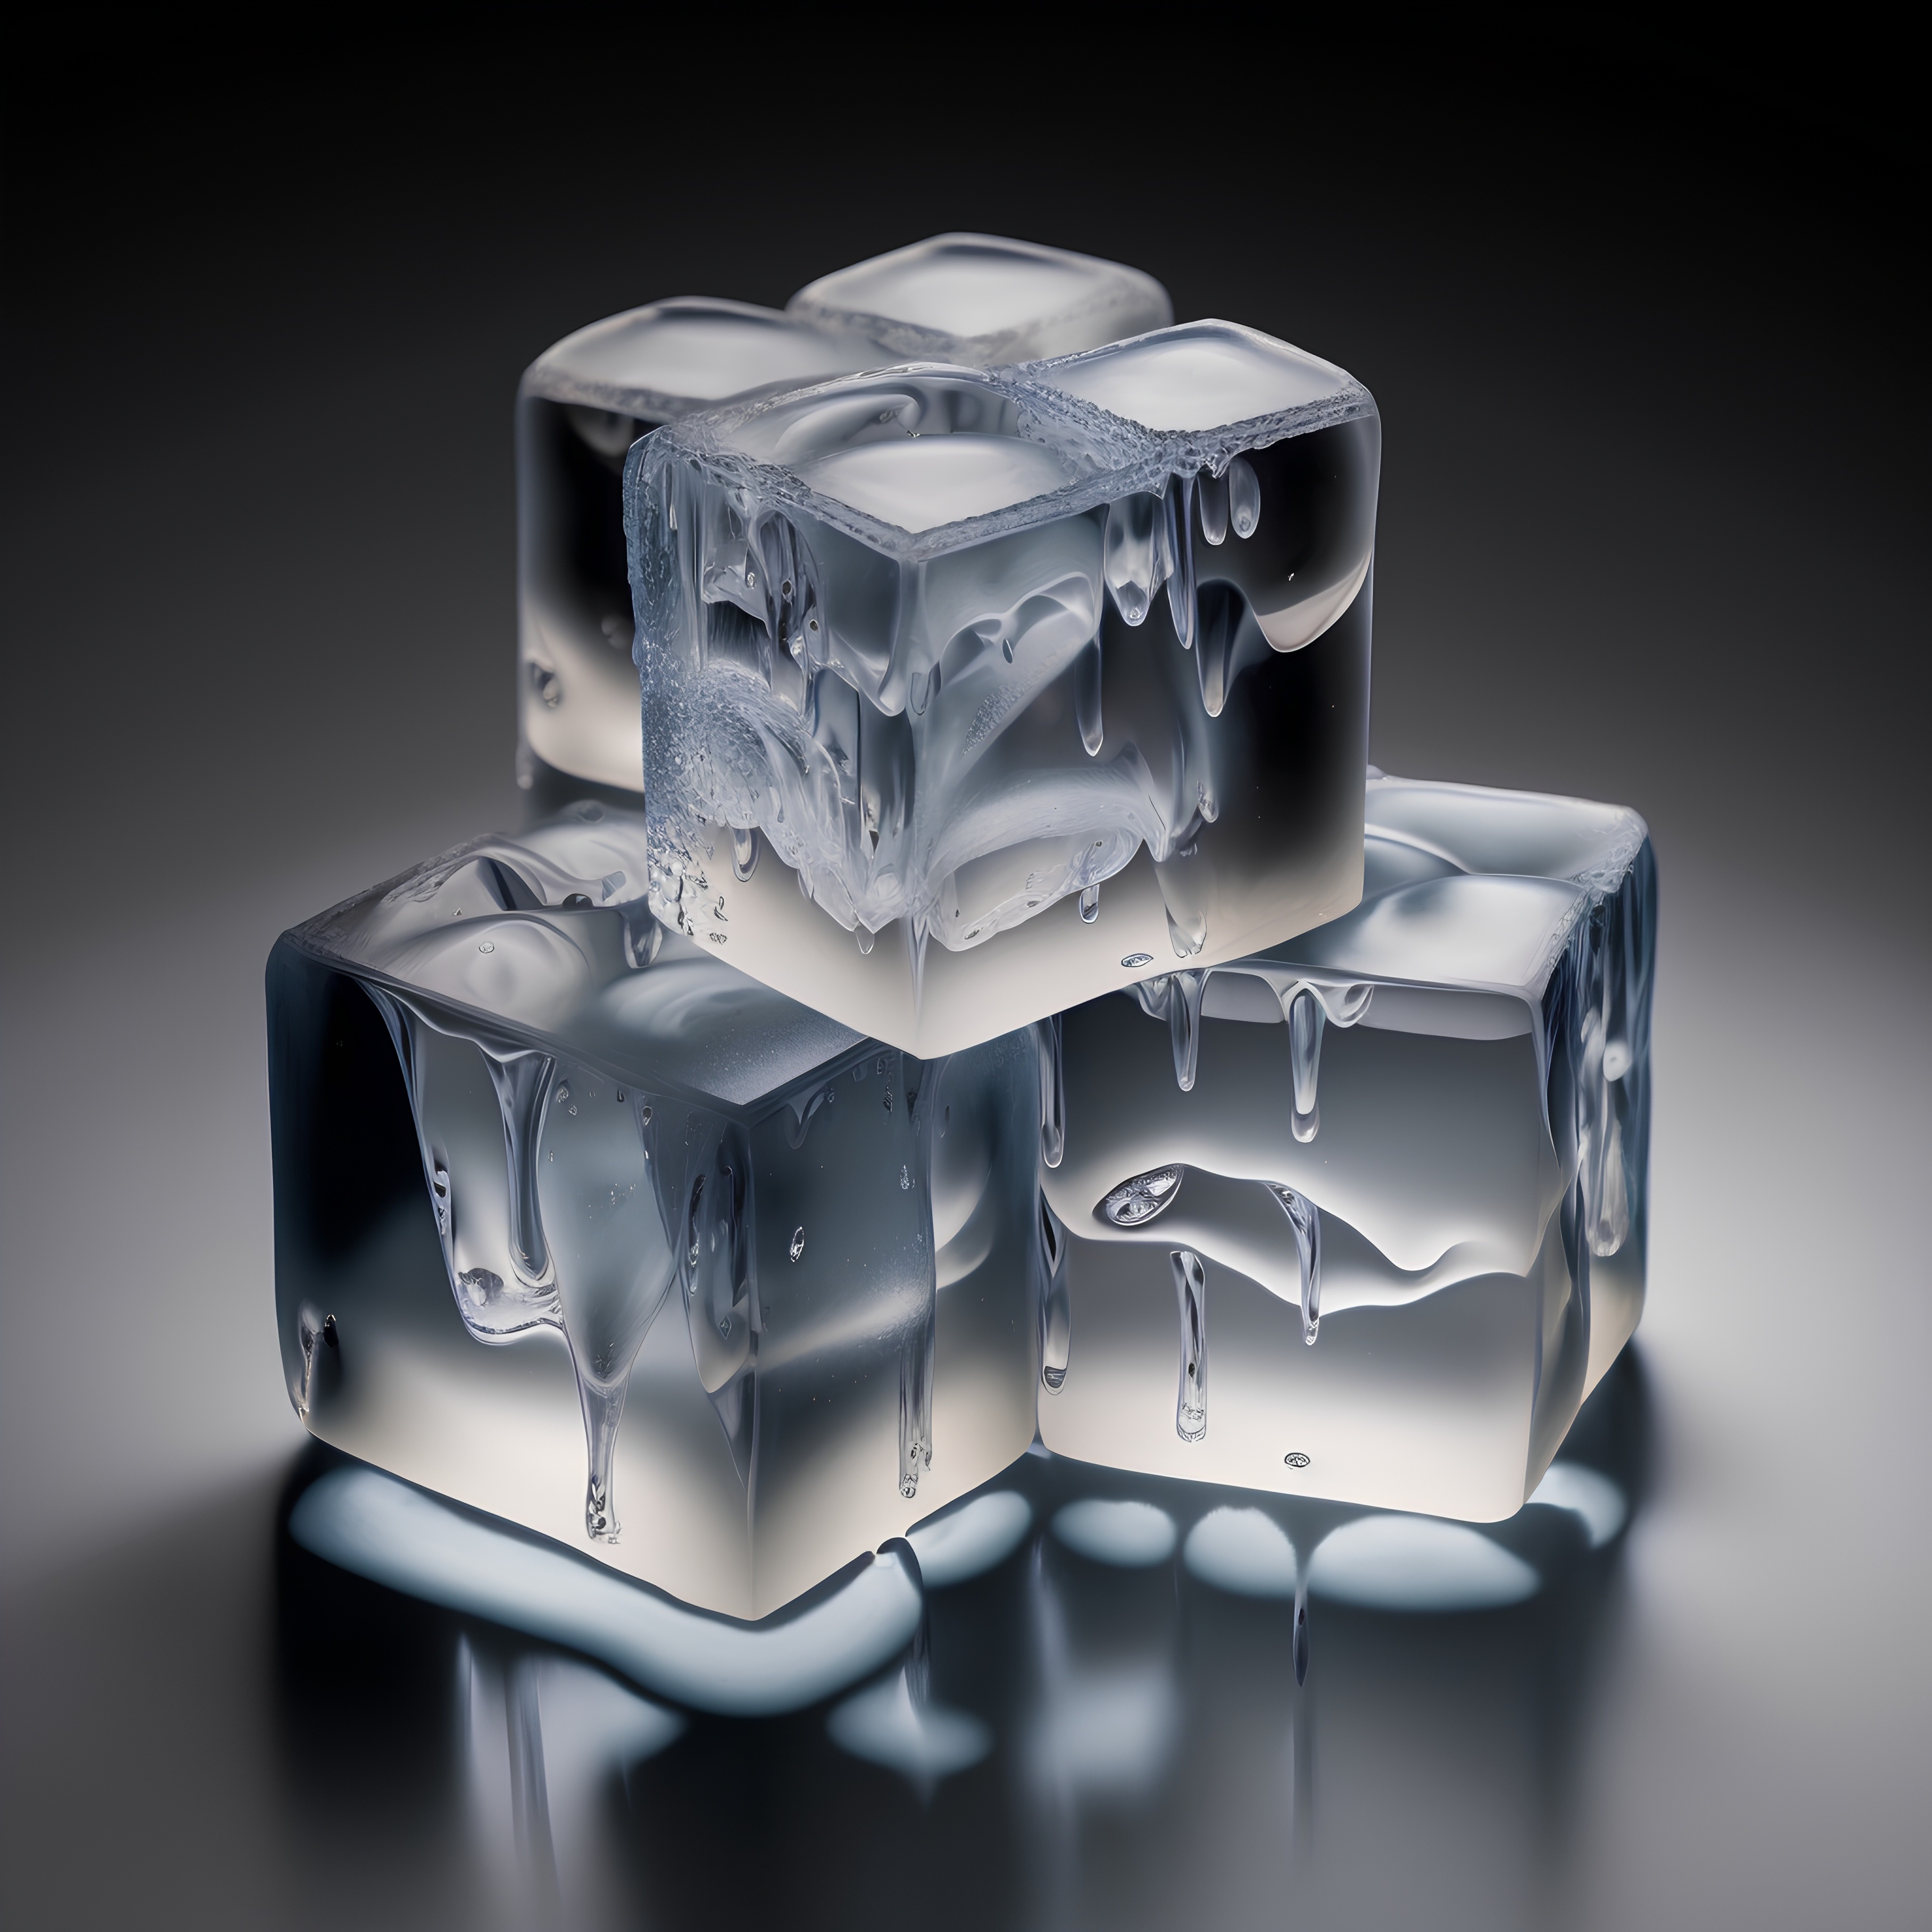 ice cubes made by ice makers. ice cubes on a dark background. 3d render.